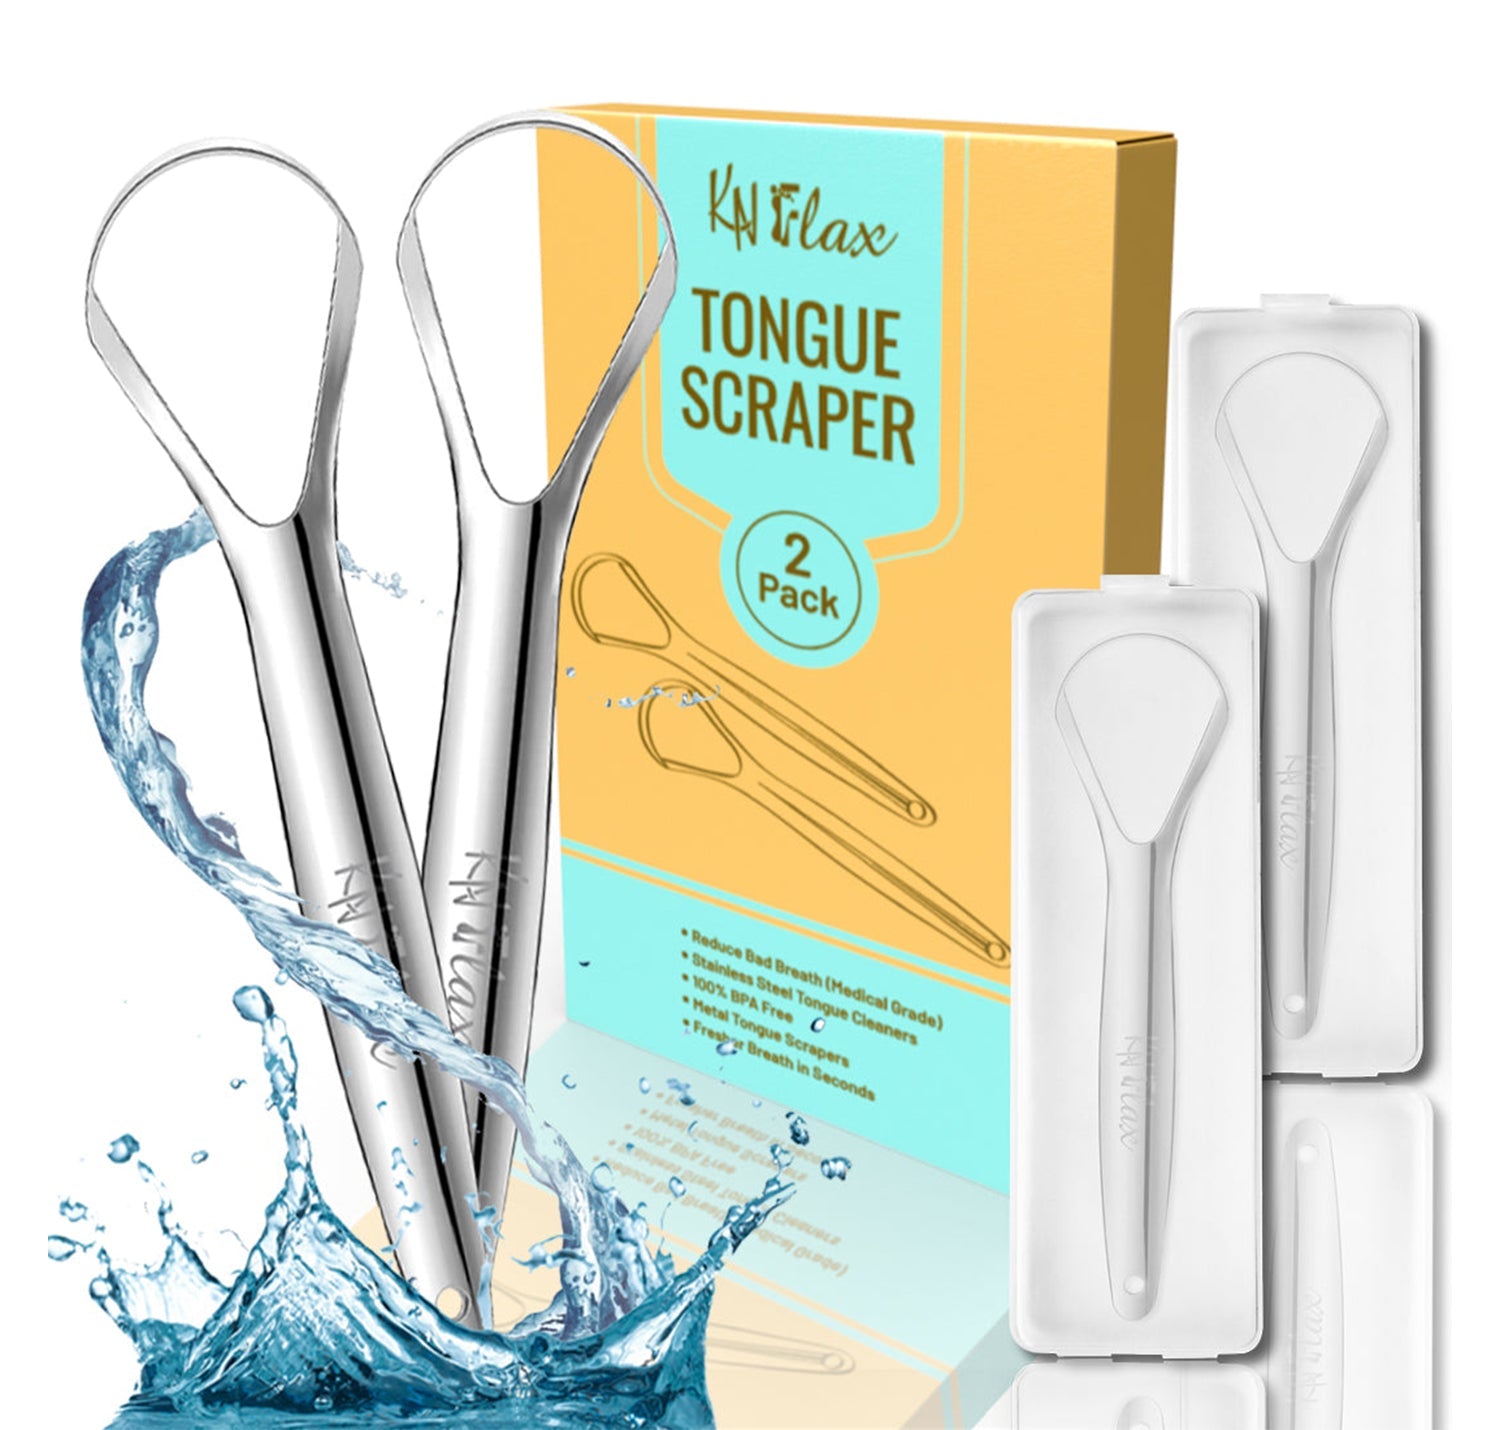 Stainless Steel Tongue Scrapers - Set of 4 - Reduce Bad Breath and